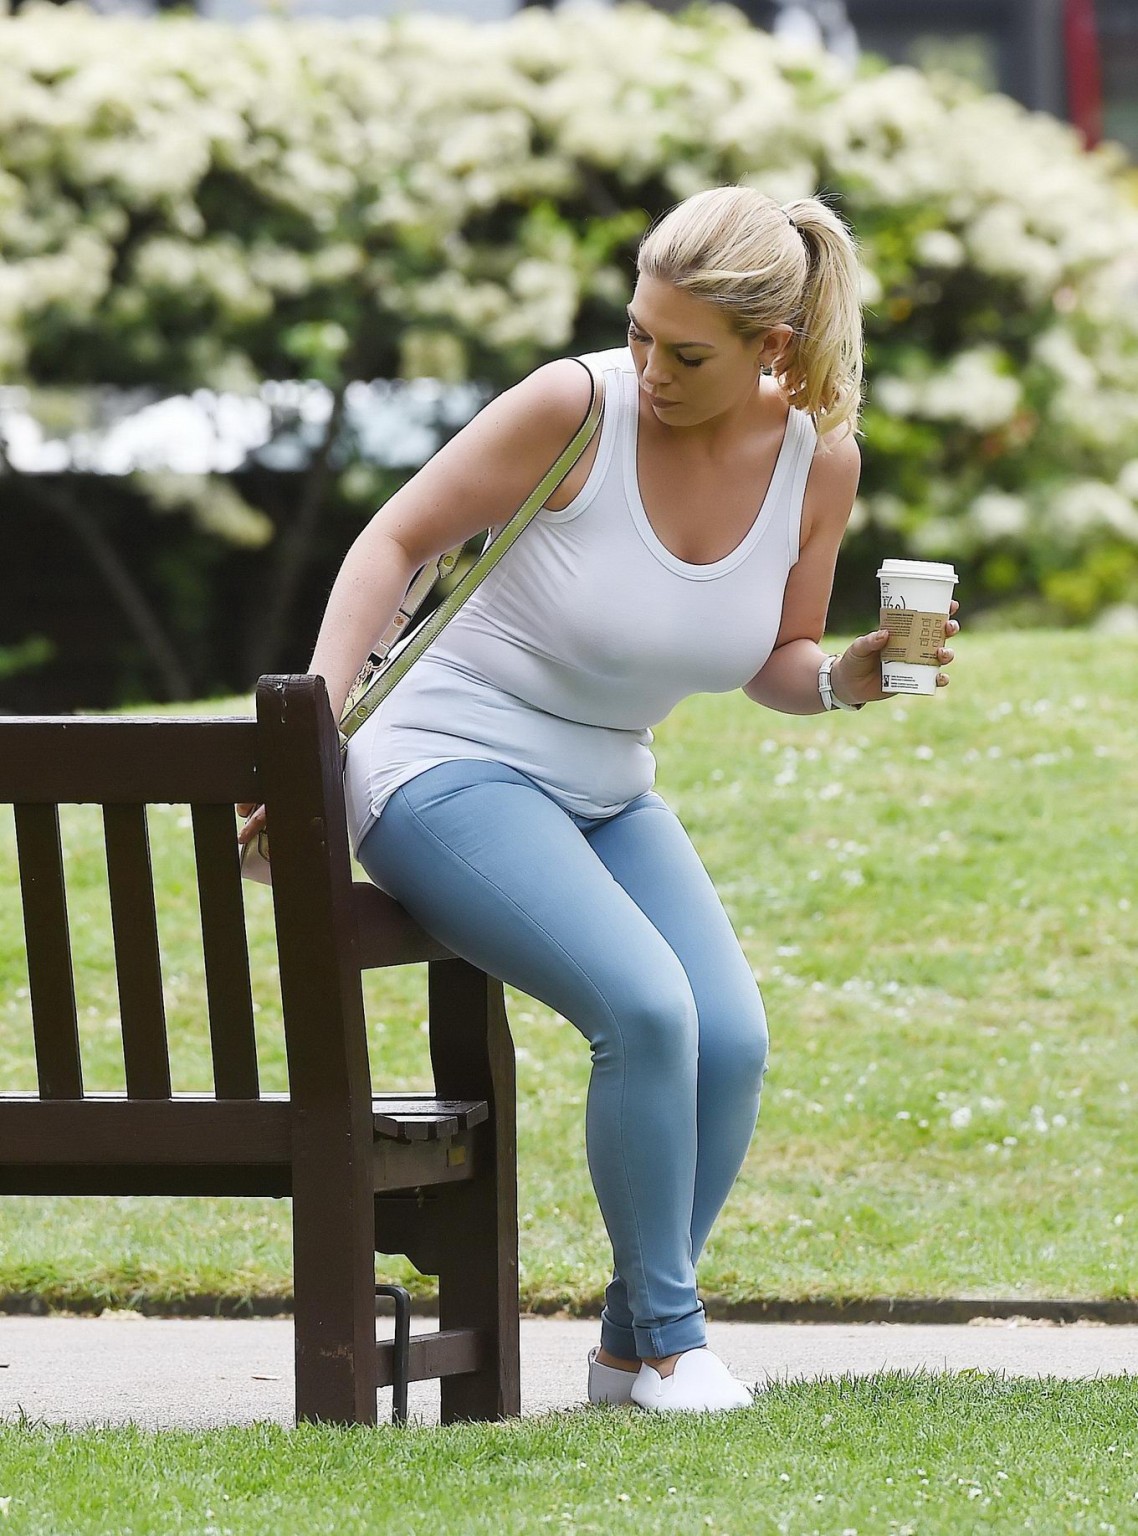 Busty Frankie Essex braless downblouse at a park in London #75162080